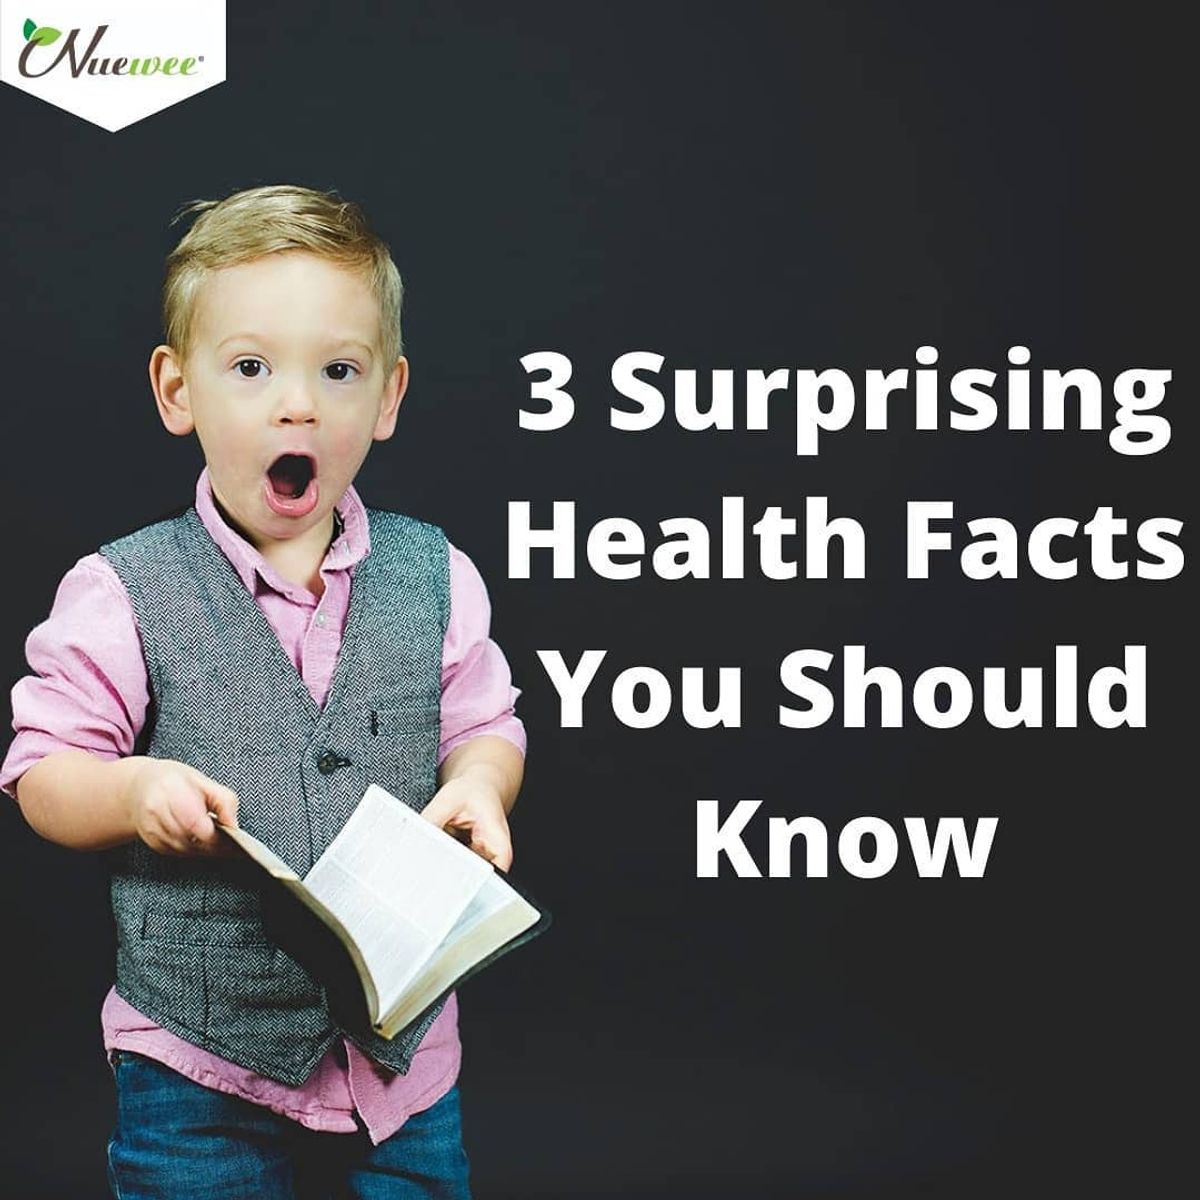 3 Surprising Health Facts You Should Know